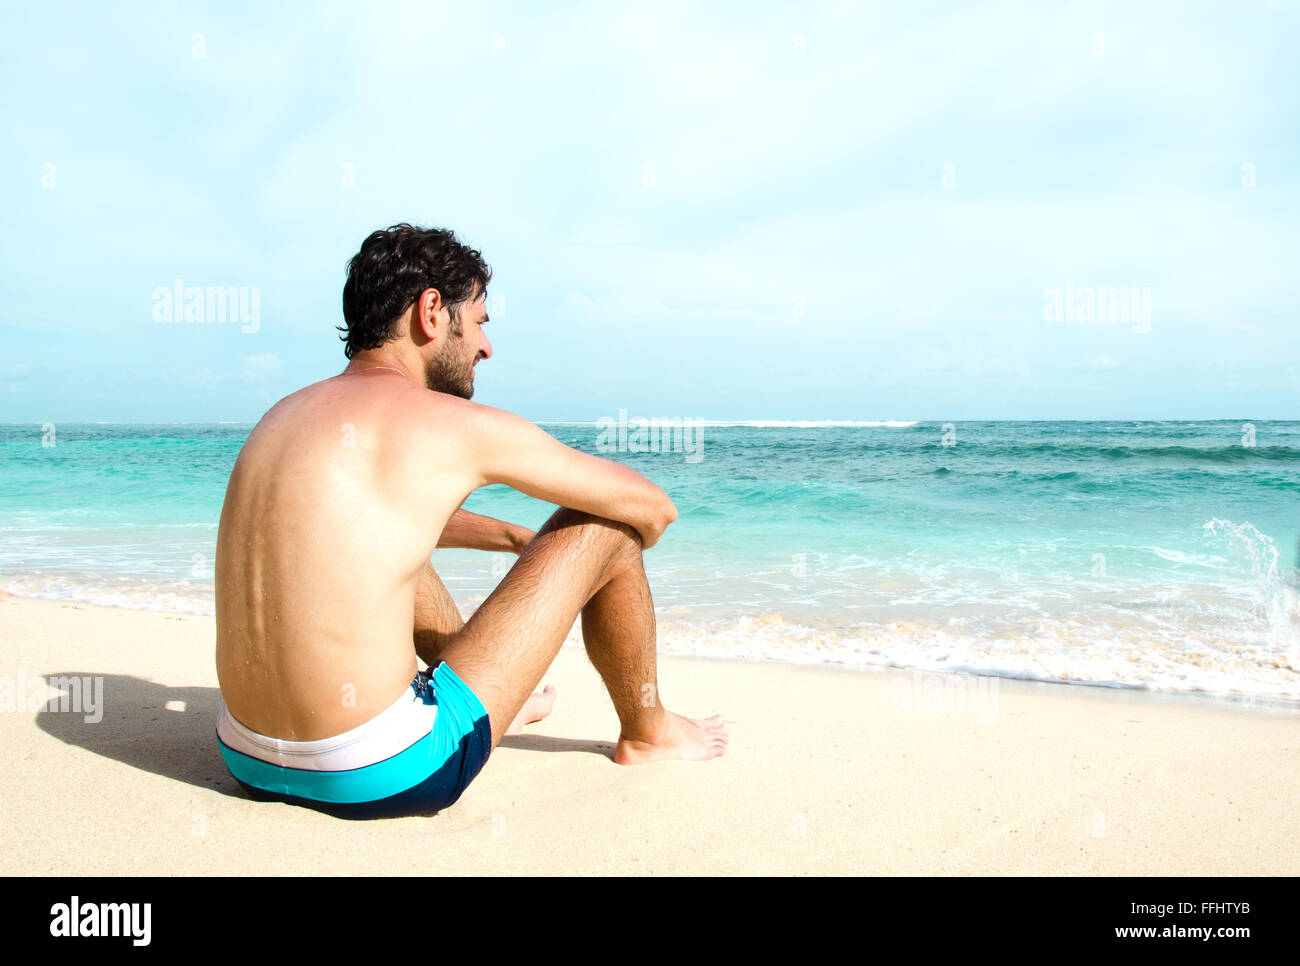 The man enjoys the view of the ocean on a sunny beach. Stock image Stock Photo